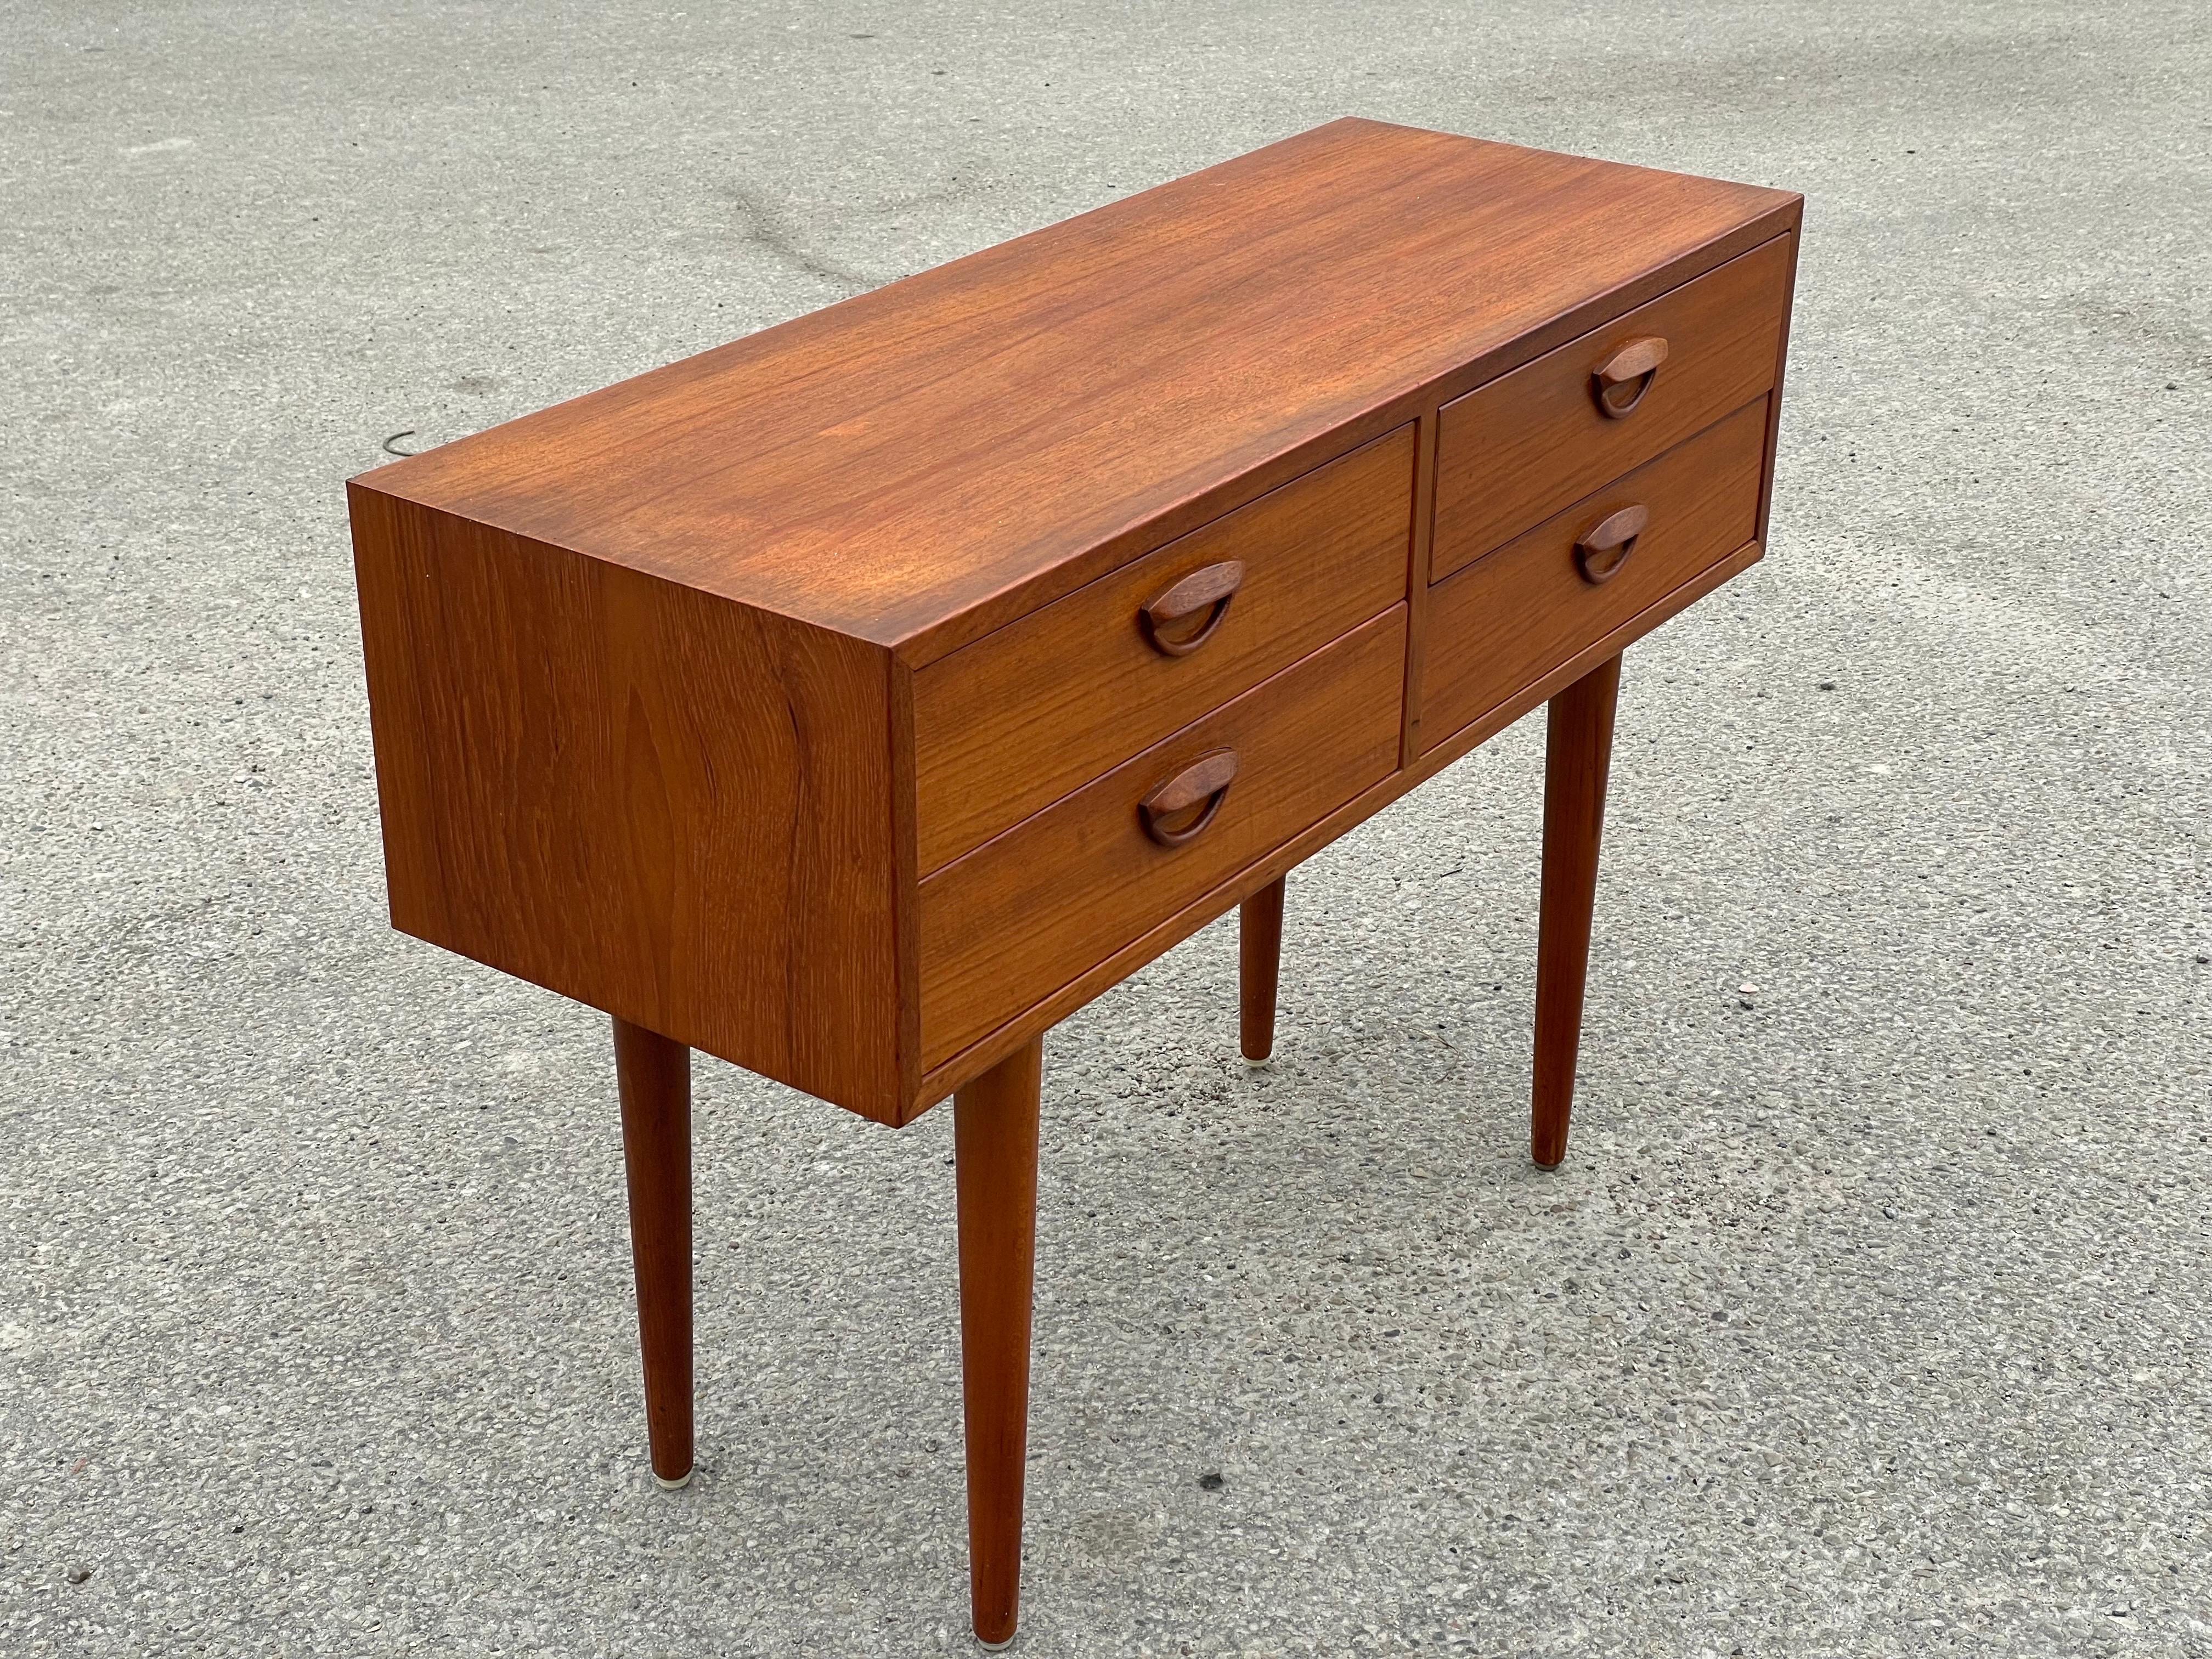 Chest of drawers designed by Kai Kristiansen and produced by Feldballes Møbelfabrik, Denmark in the 1960s. This cabinet is made of teak and has beautiful detailed lines with his signature eyelid handles, typical of Kristiansen's work. Sits on turned